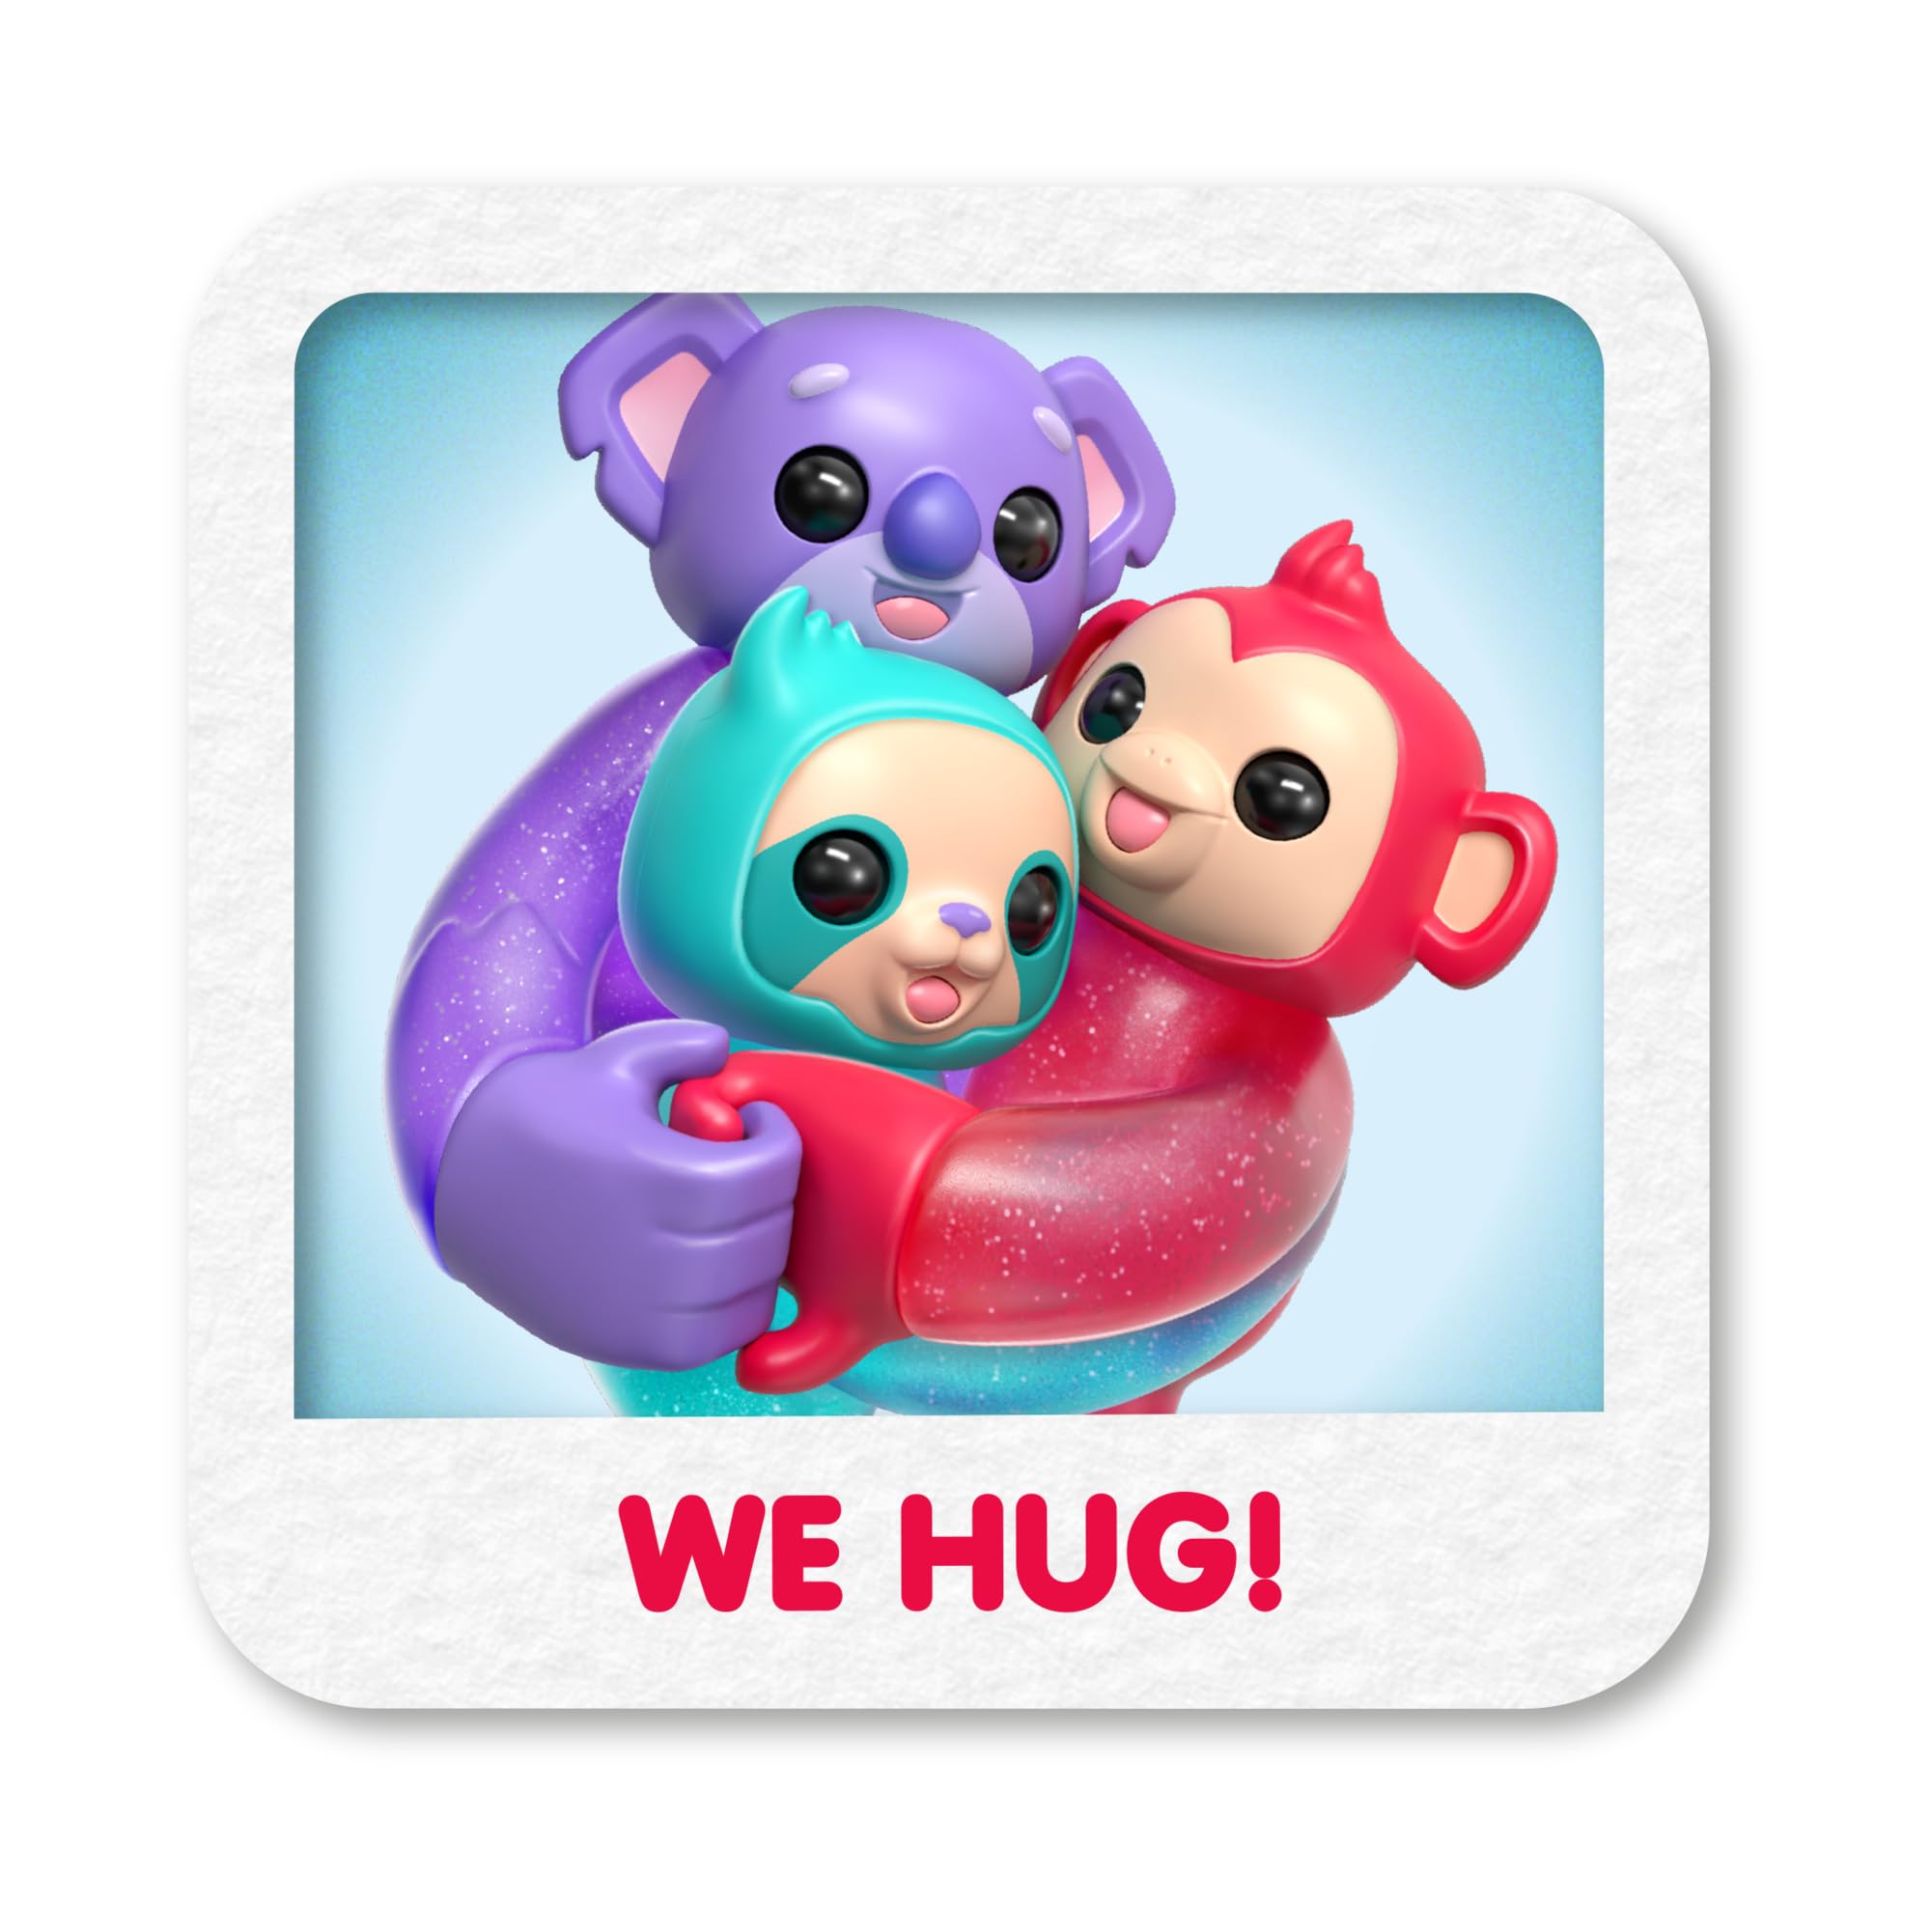 Little Live Pets Hug n' Hang Zoogooz - Mookie Monkey. an Interactive Electronic Squishy Stretchy Toy Pet with 70+ Sounds & Reactions. Stretch, Squish & Link Their Hands